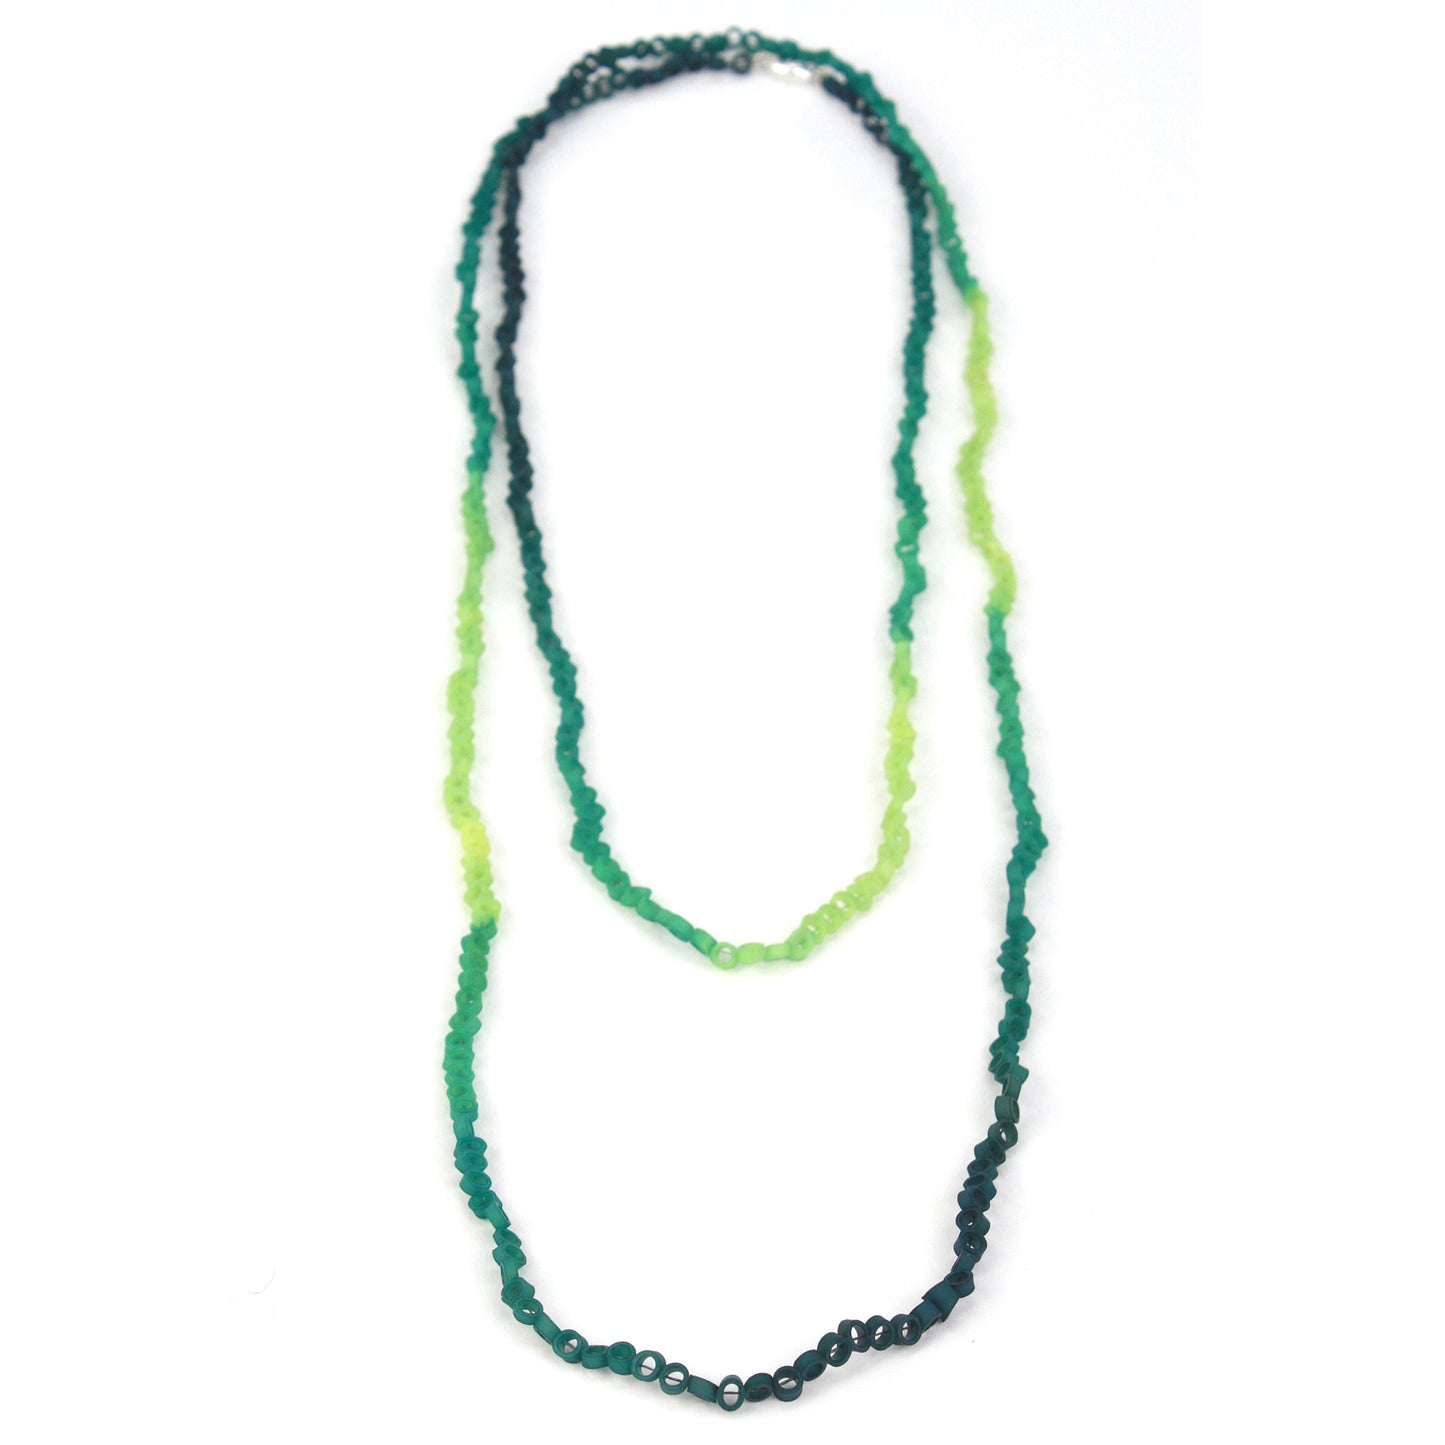 Little links necklace - Greens